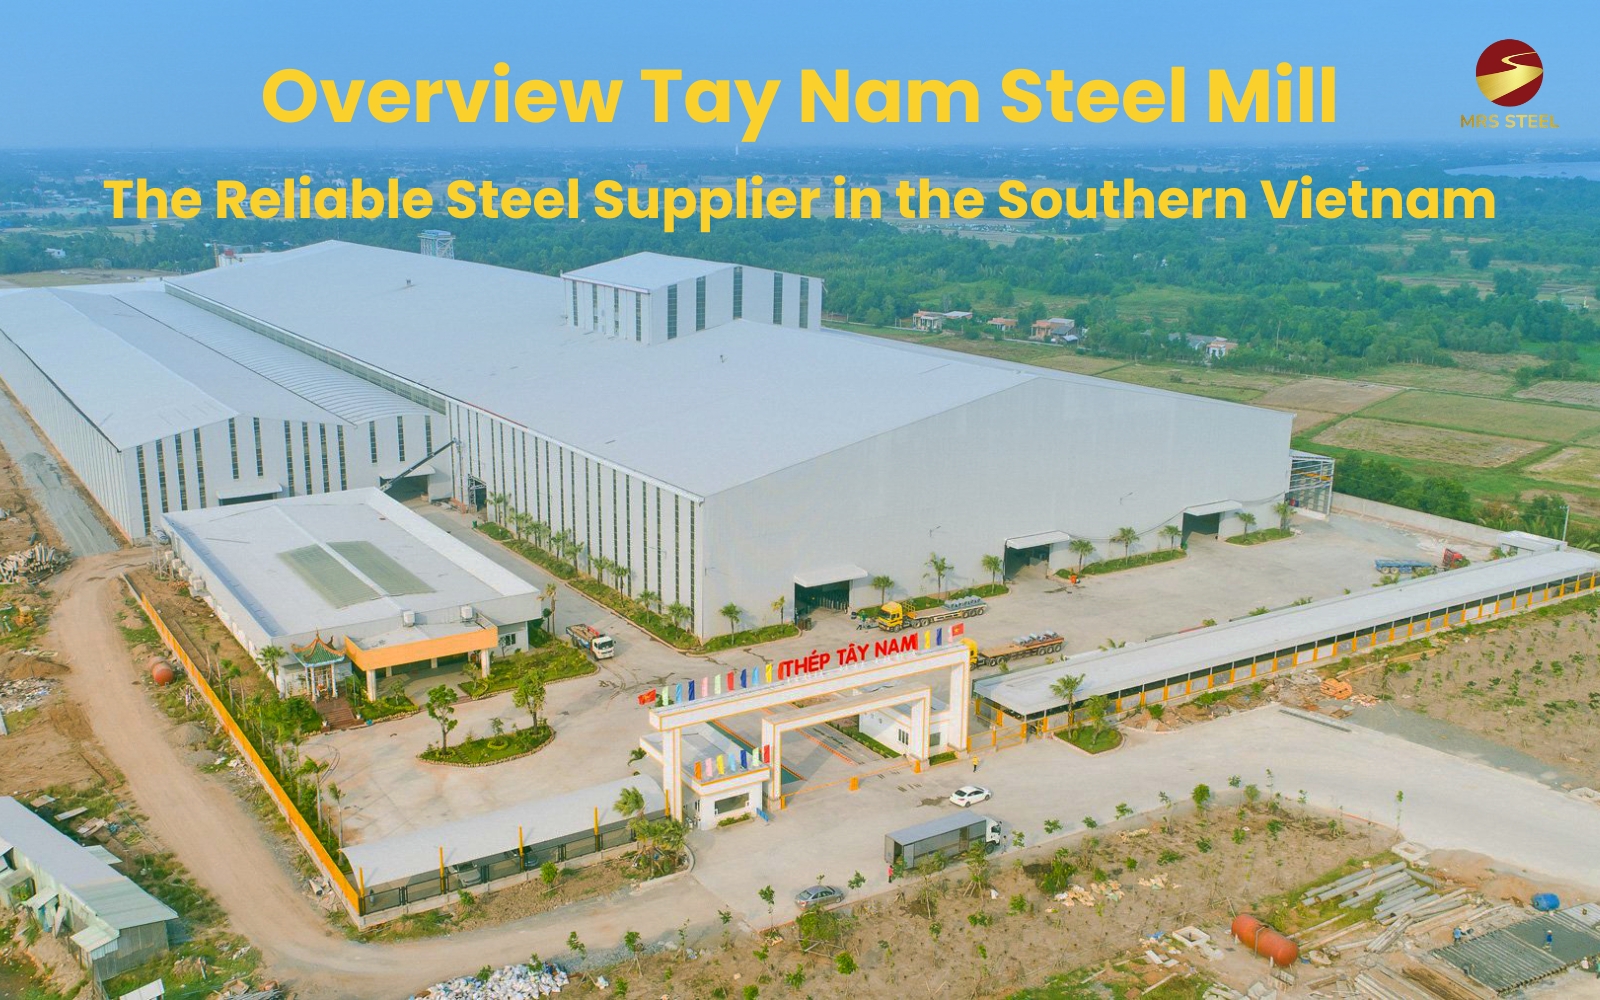 Overview Tay Nam Steel Mill - A Reliable Steel Supplier in the Southern Vietnam